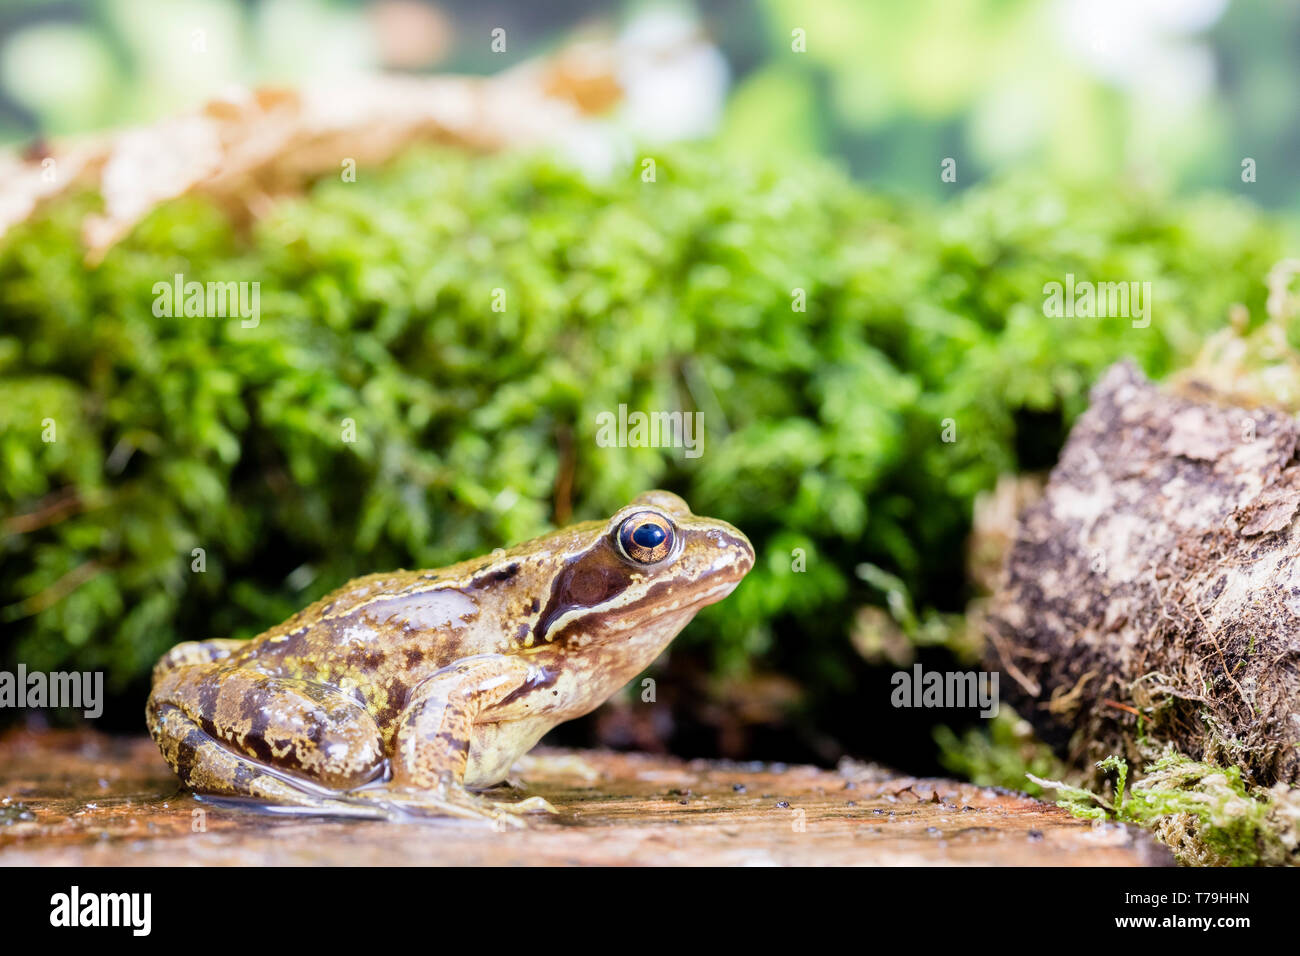 Common frog in Wales in springtime, Photographed in a controlled environment and then returned to where it was found. Stock Photo